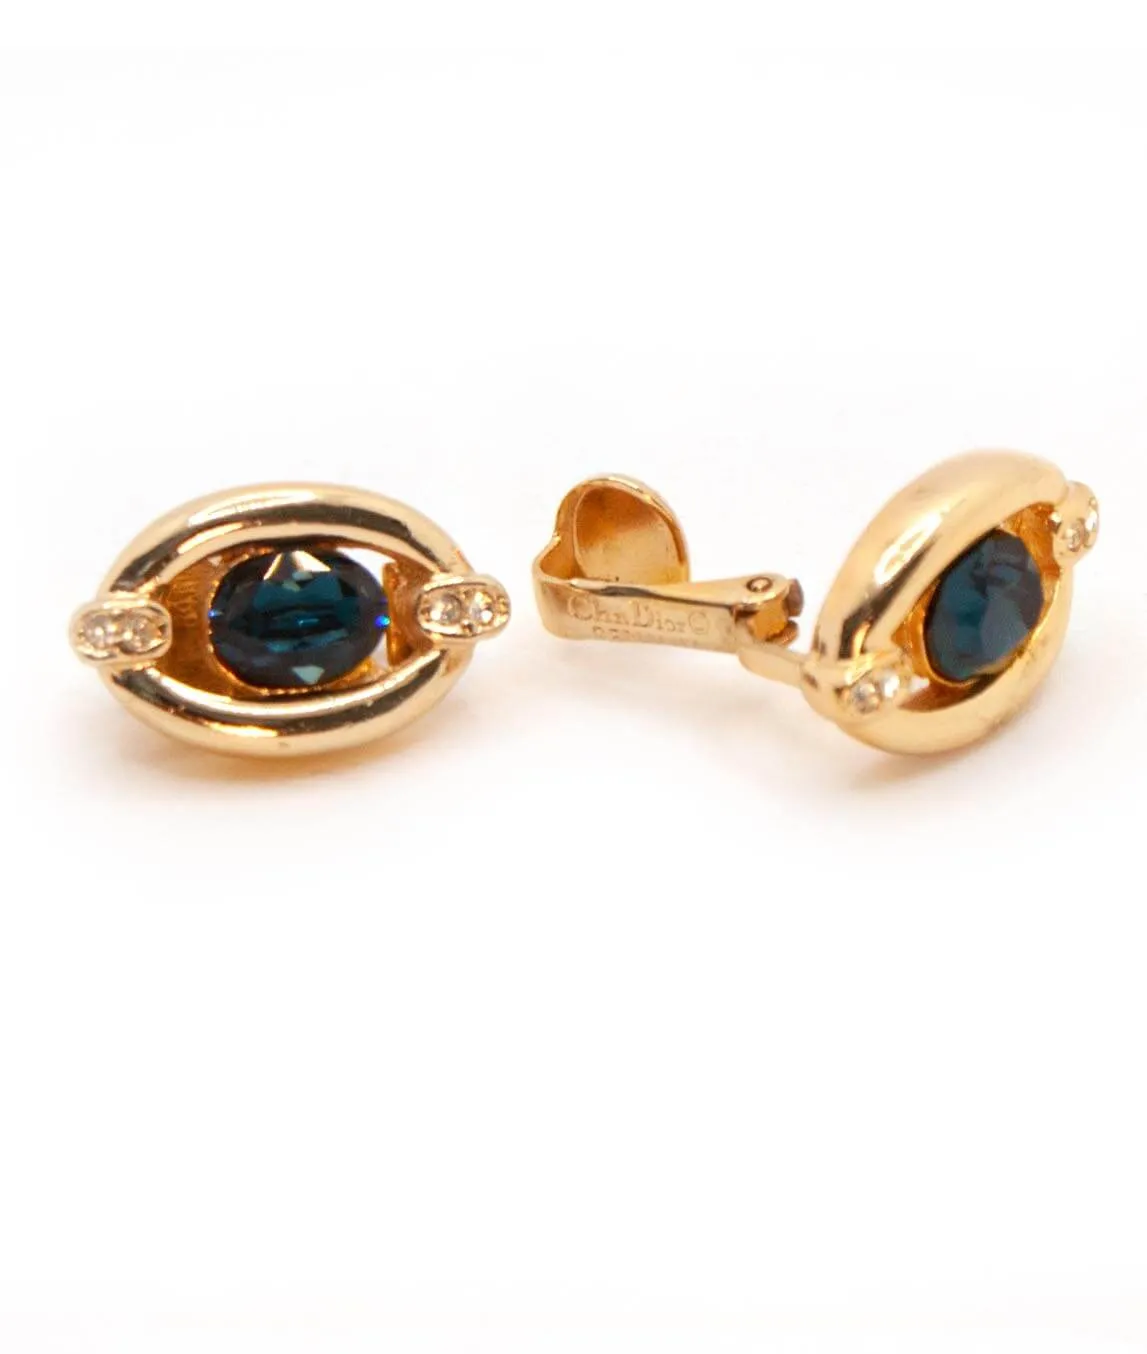 Christian Dior blue and gold clip-on earrings